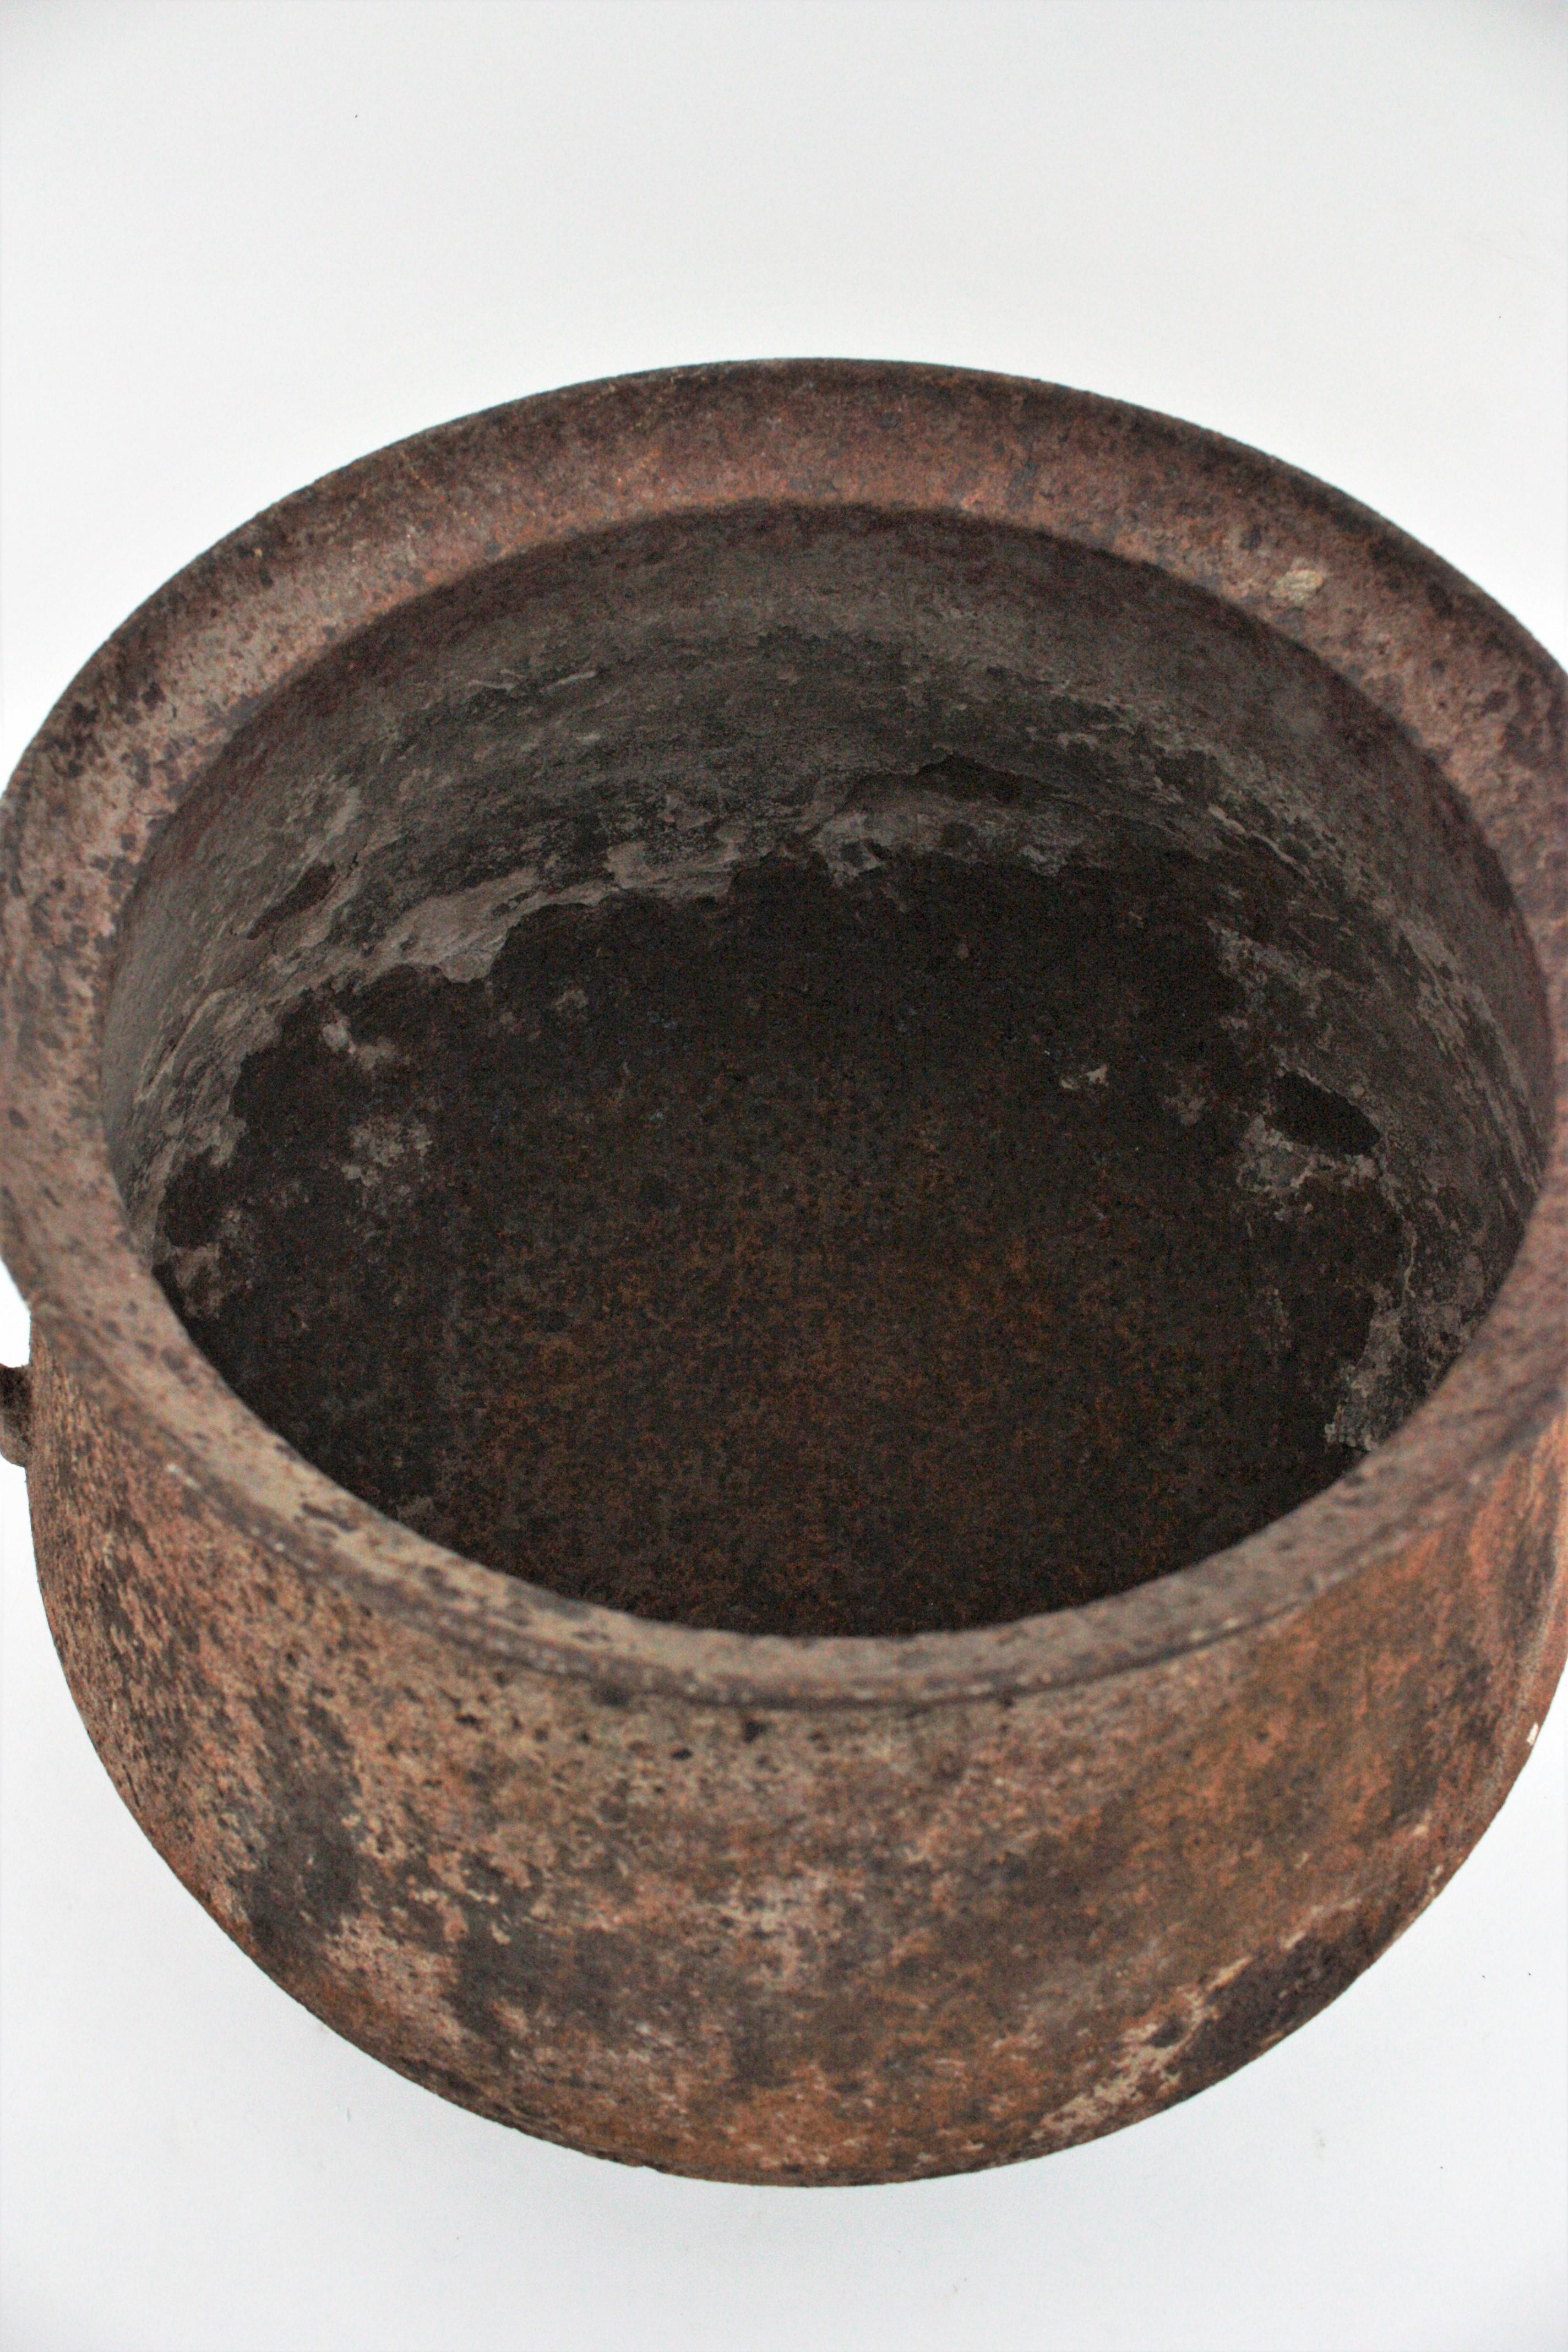 Spanish Rustic Iron Cauldron Pot or Vessel with Rusty Original Patina For Sale 8